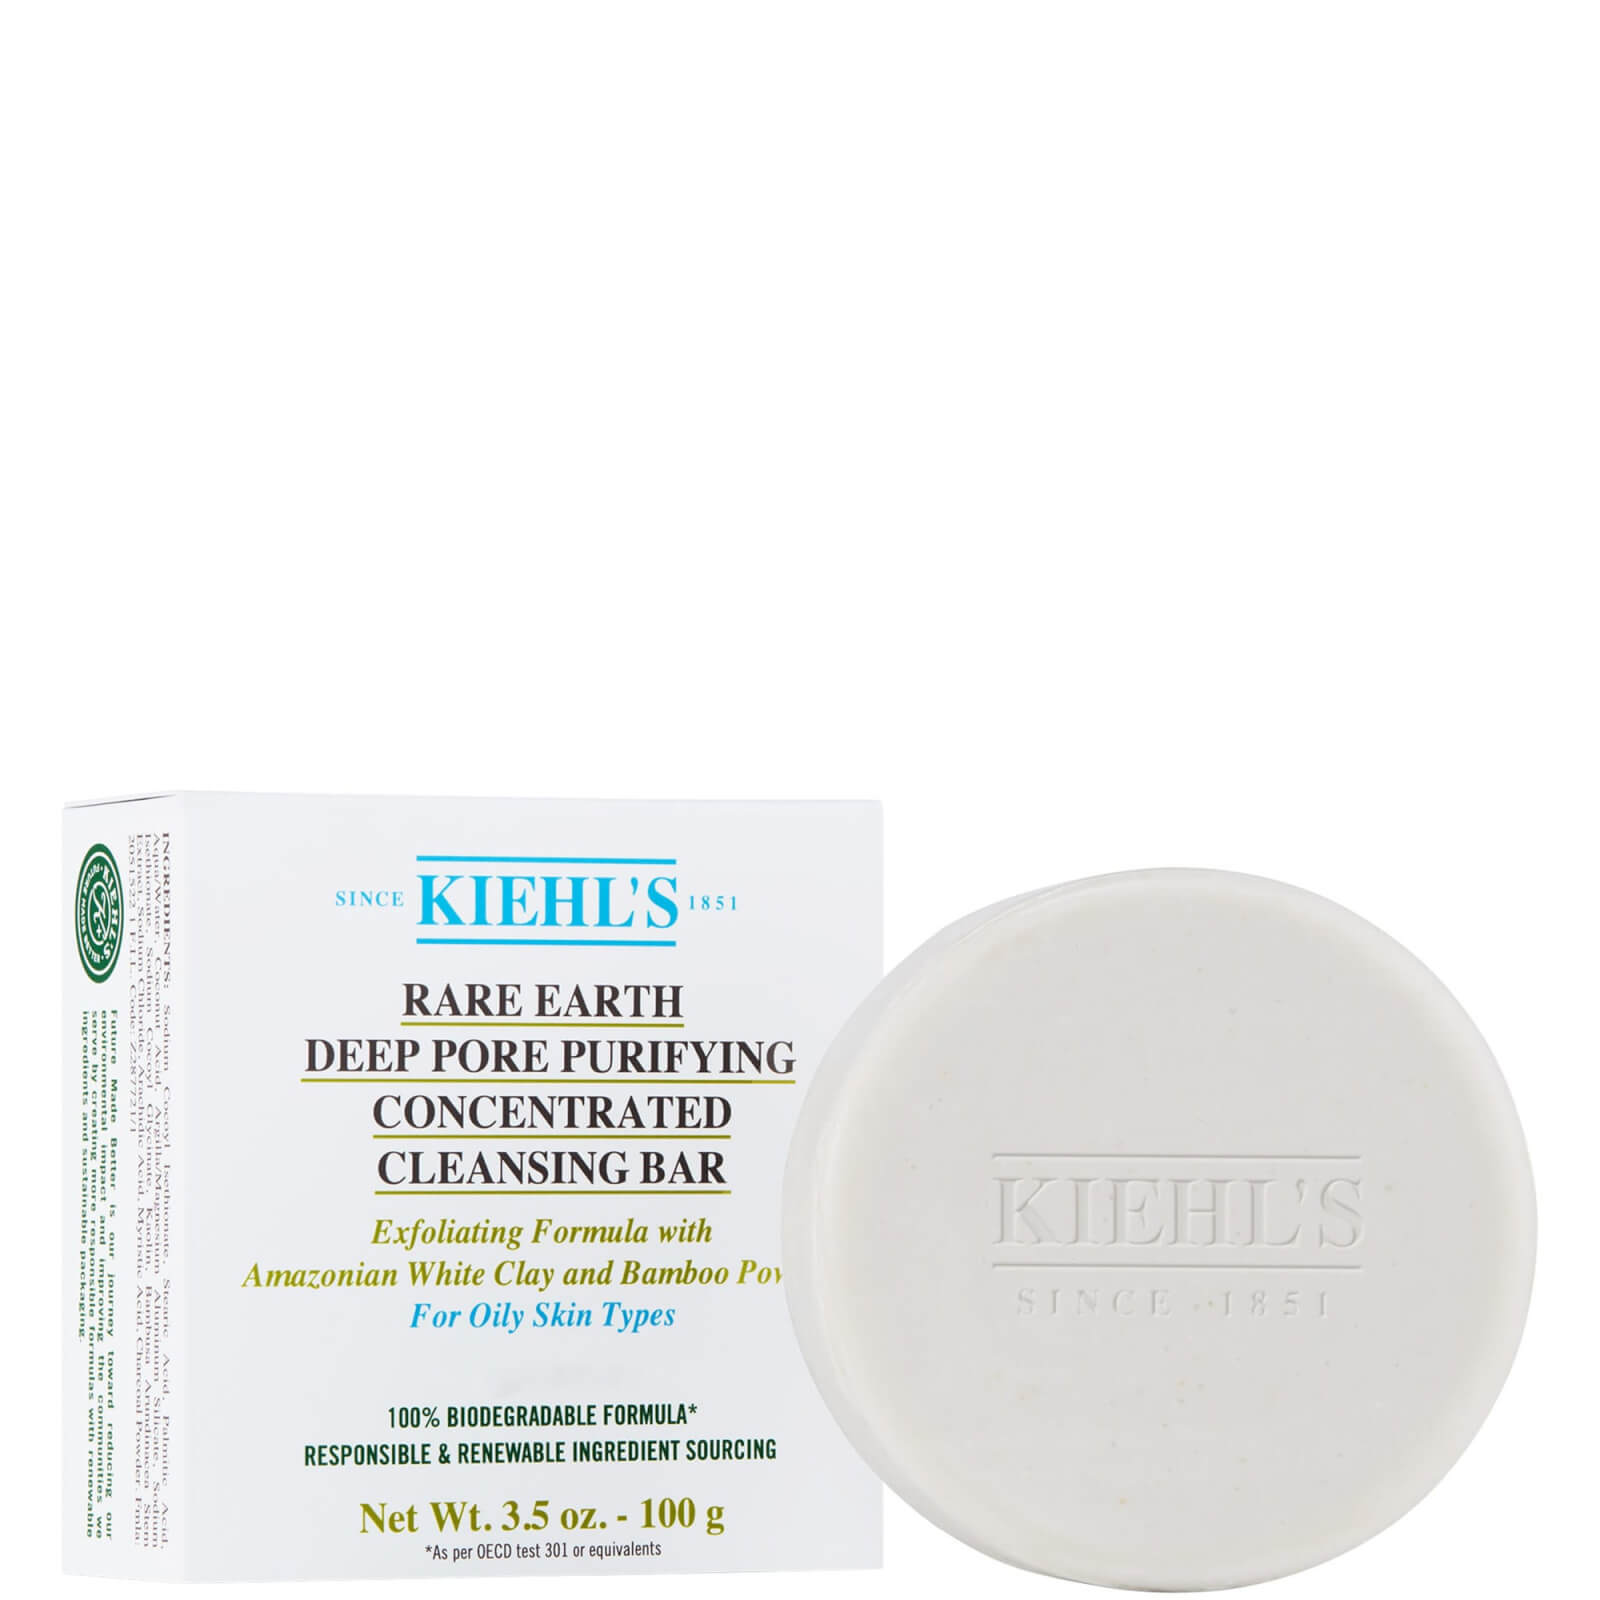 Photos - Facial / Body Cleansing Product Kiehl's Rare Earth Deep Pore Detoxifying Concentrated Cleansing Bar 100g